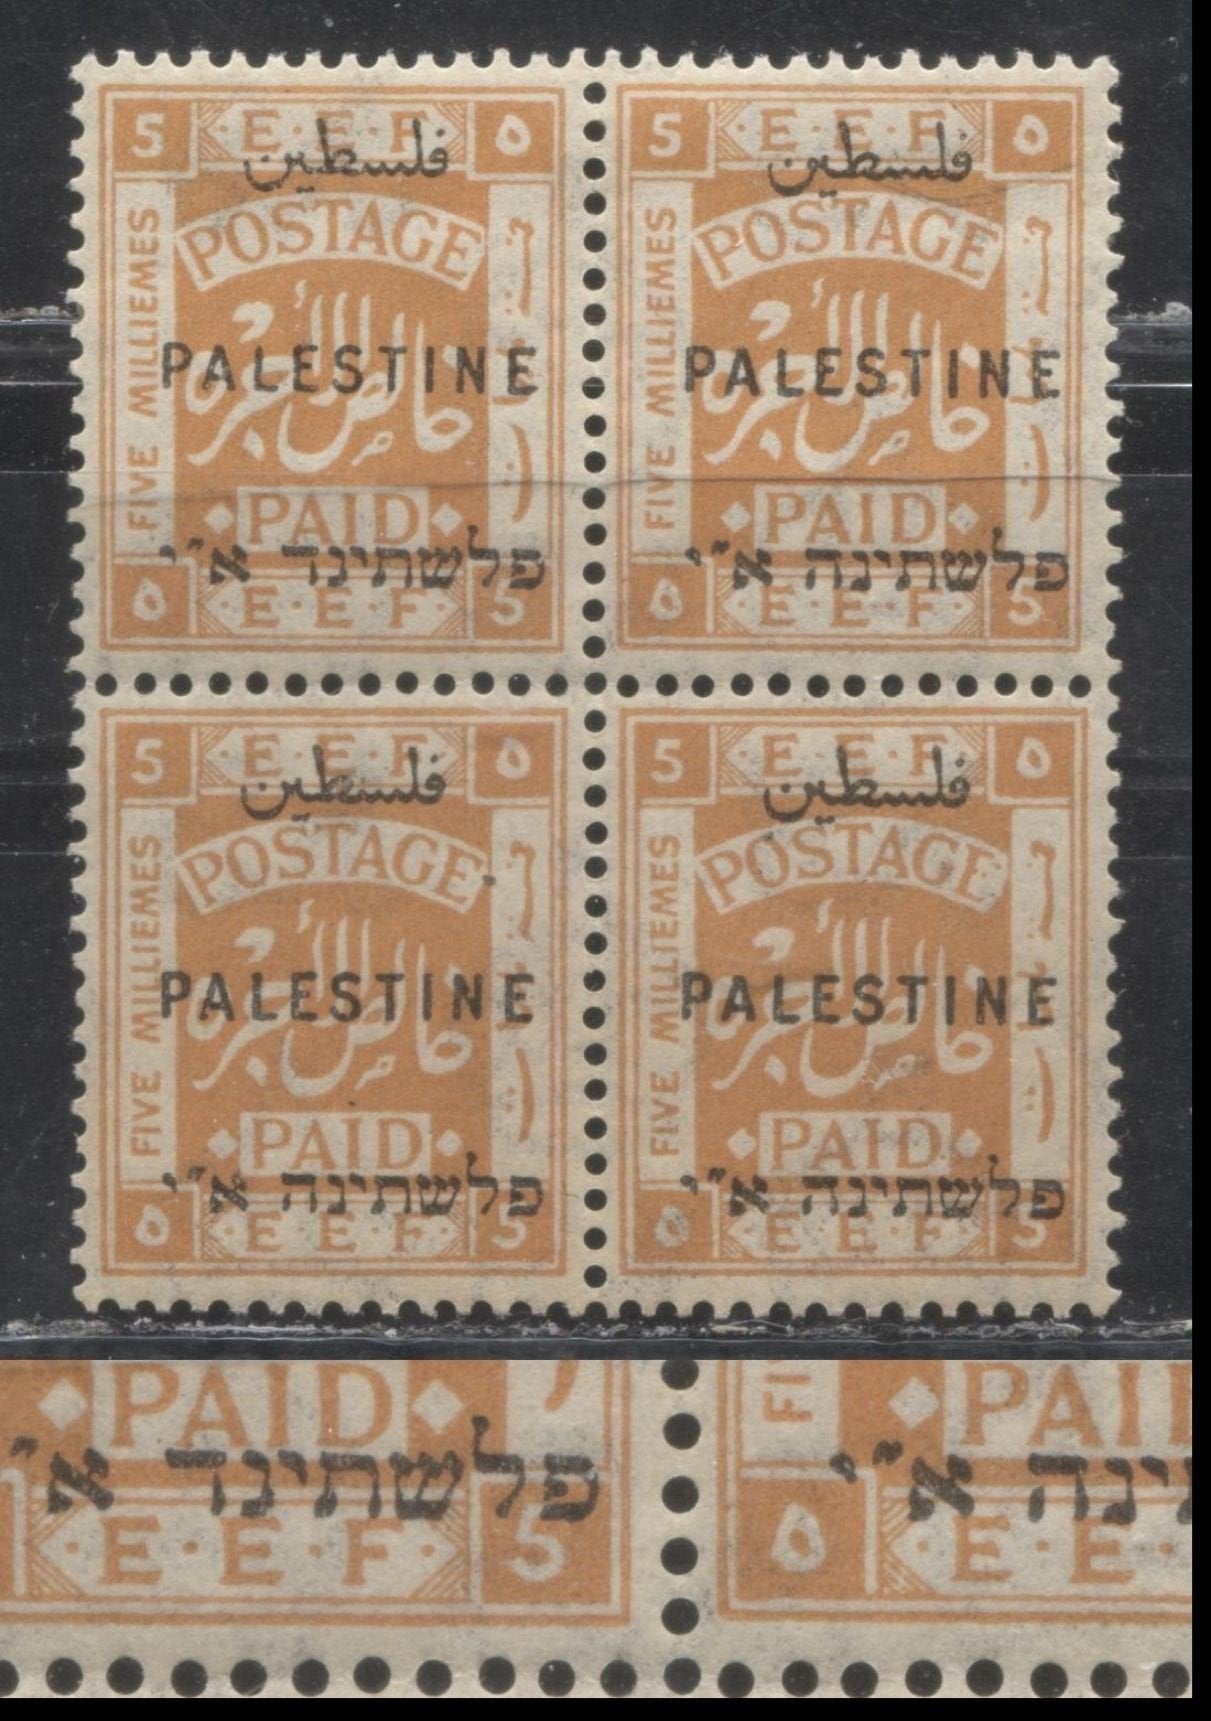 Lot 38 Palestine SG#75 5m Orange "Postage Paid" and "E.E.F" in Frame, 1922 Second London Overprinted Issue, A VFOG & VFNH Block of 4, Dalet For Hey Variety From Positon 55, Overprint Types 2 and 3